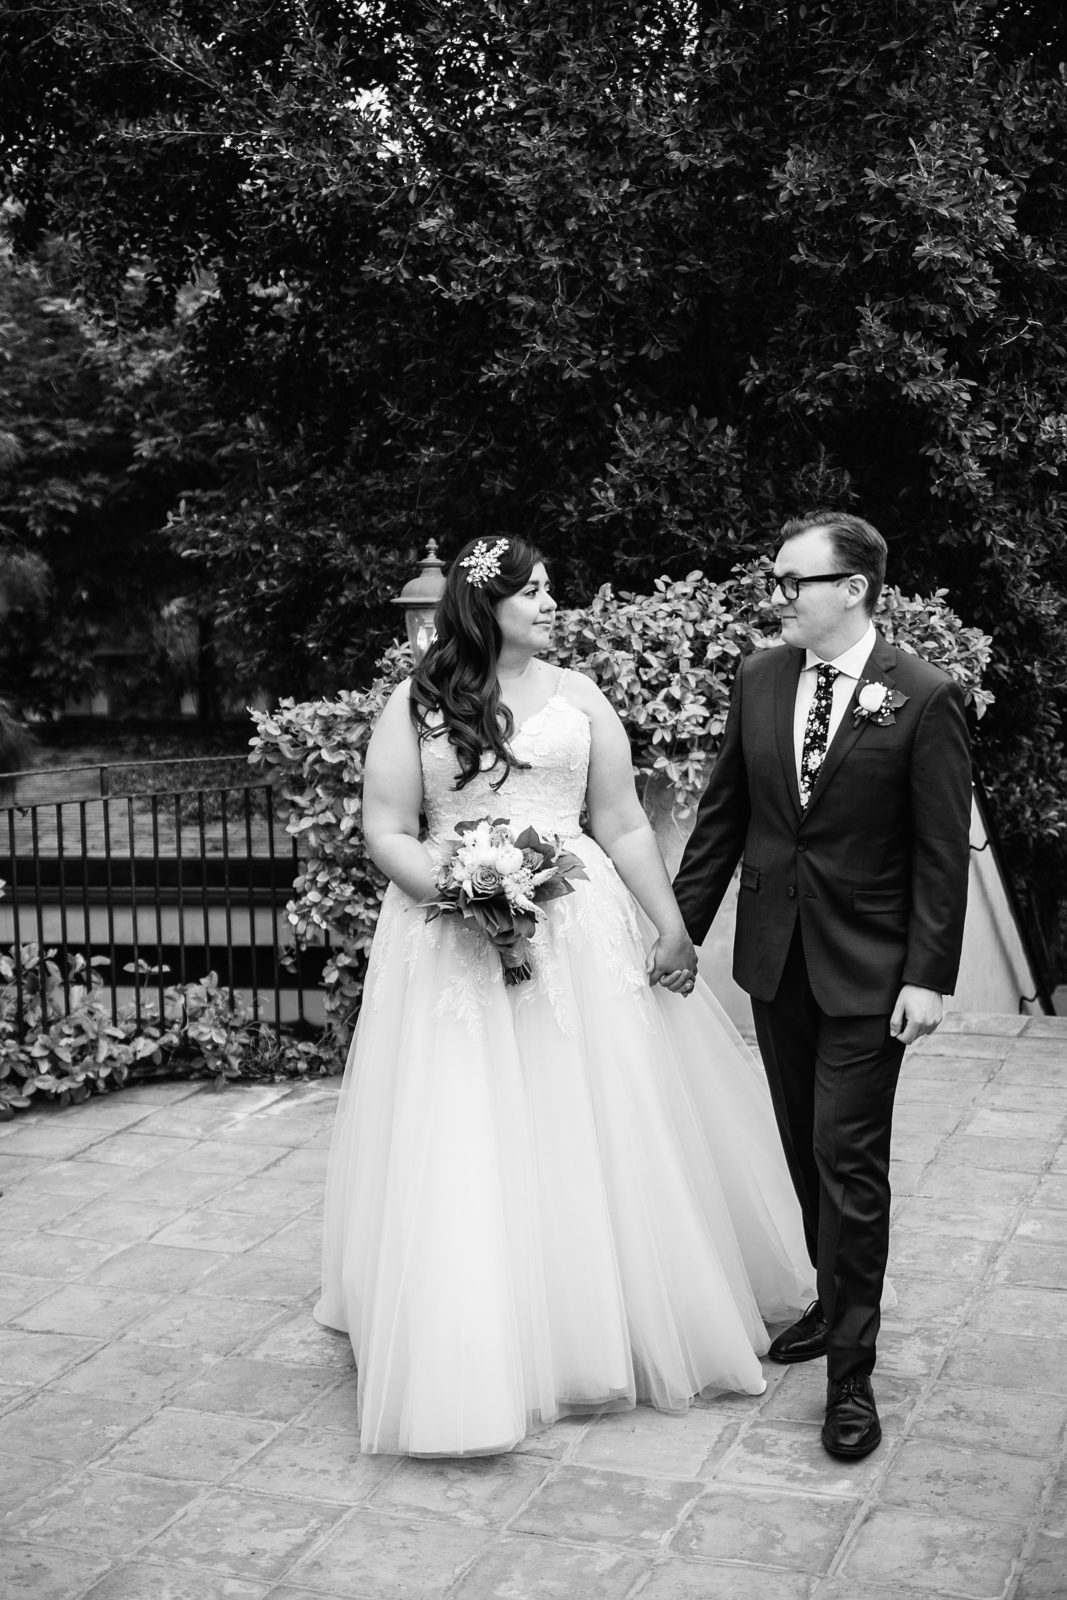 Bride and Groom walking together during their The Wright House Provencal wedding by Mesa wedding photographer PMA Photography.